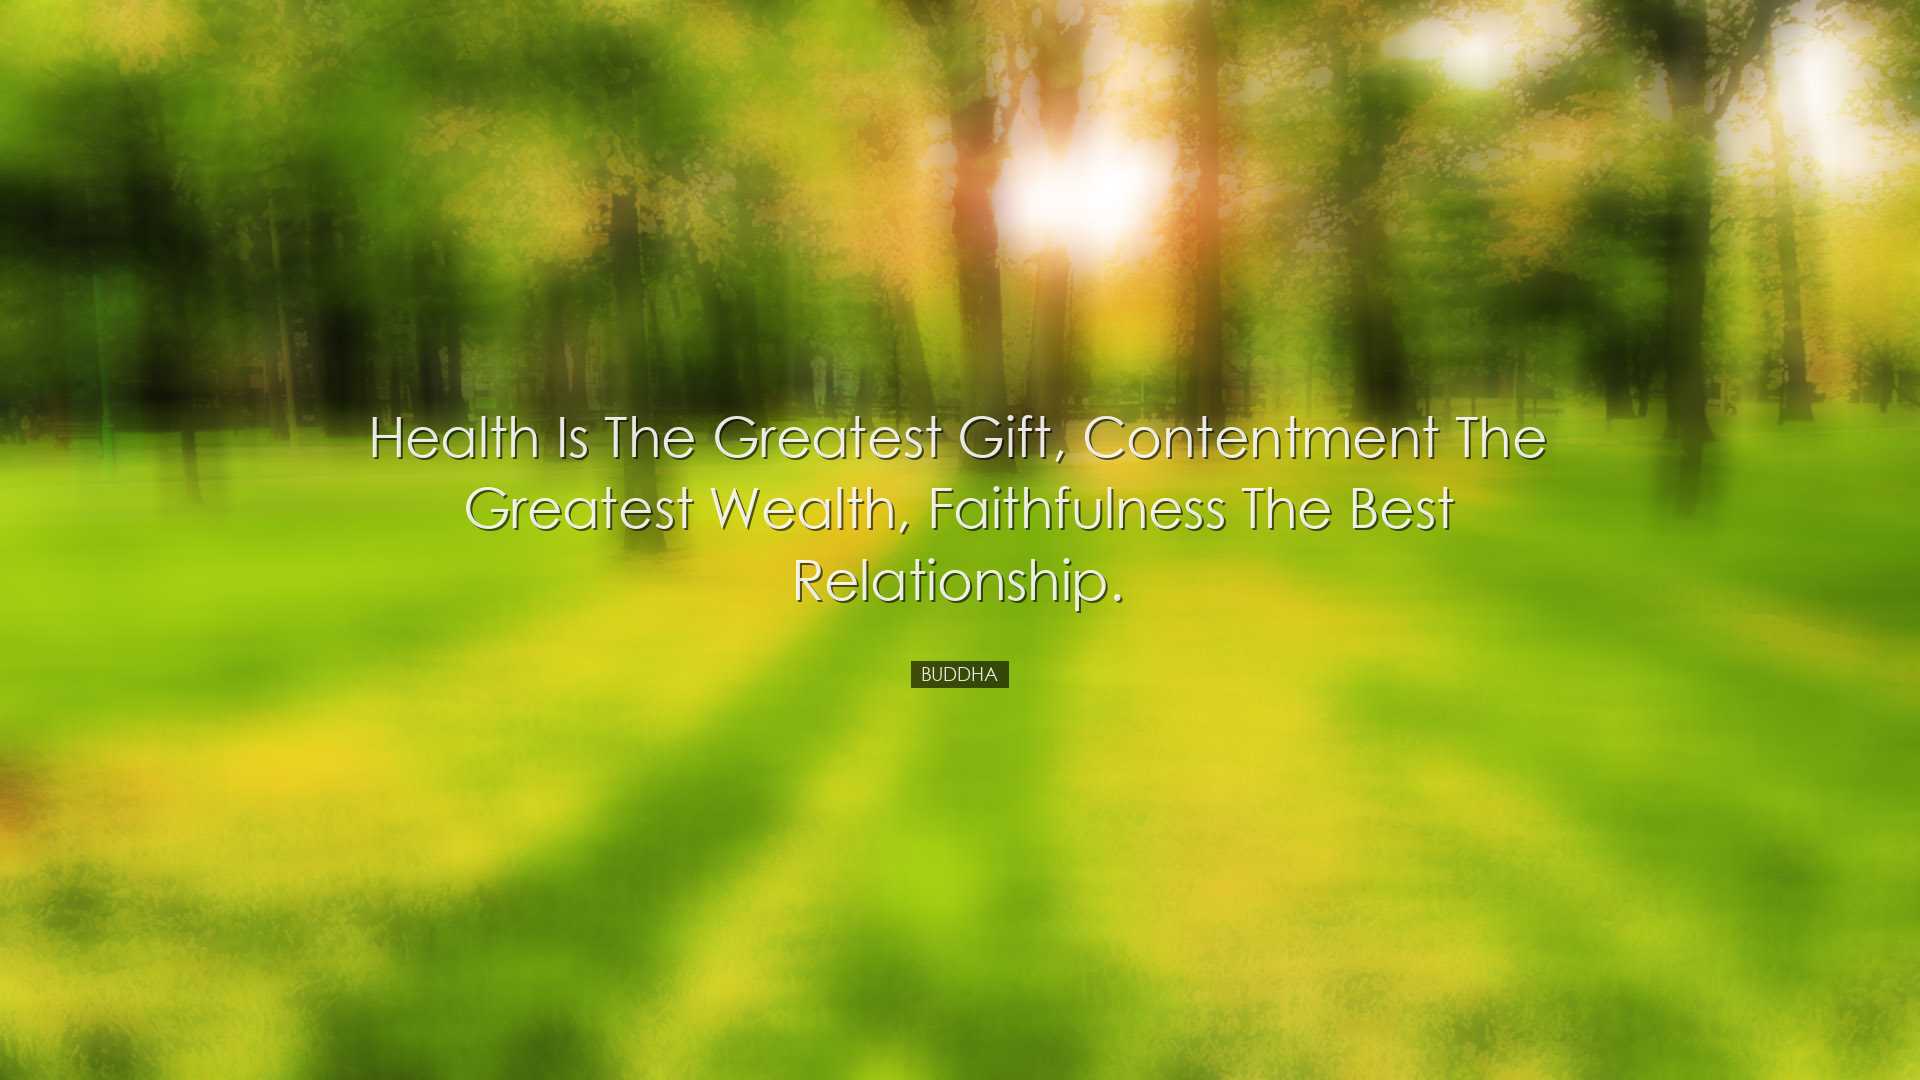 Health is the greatest gift, contentment the greatest wealth, fait